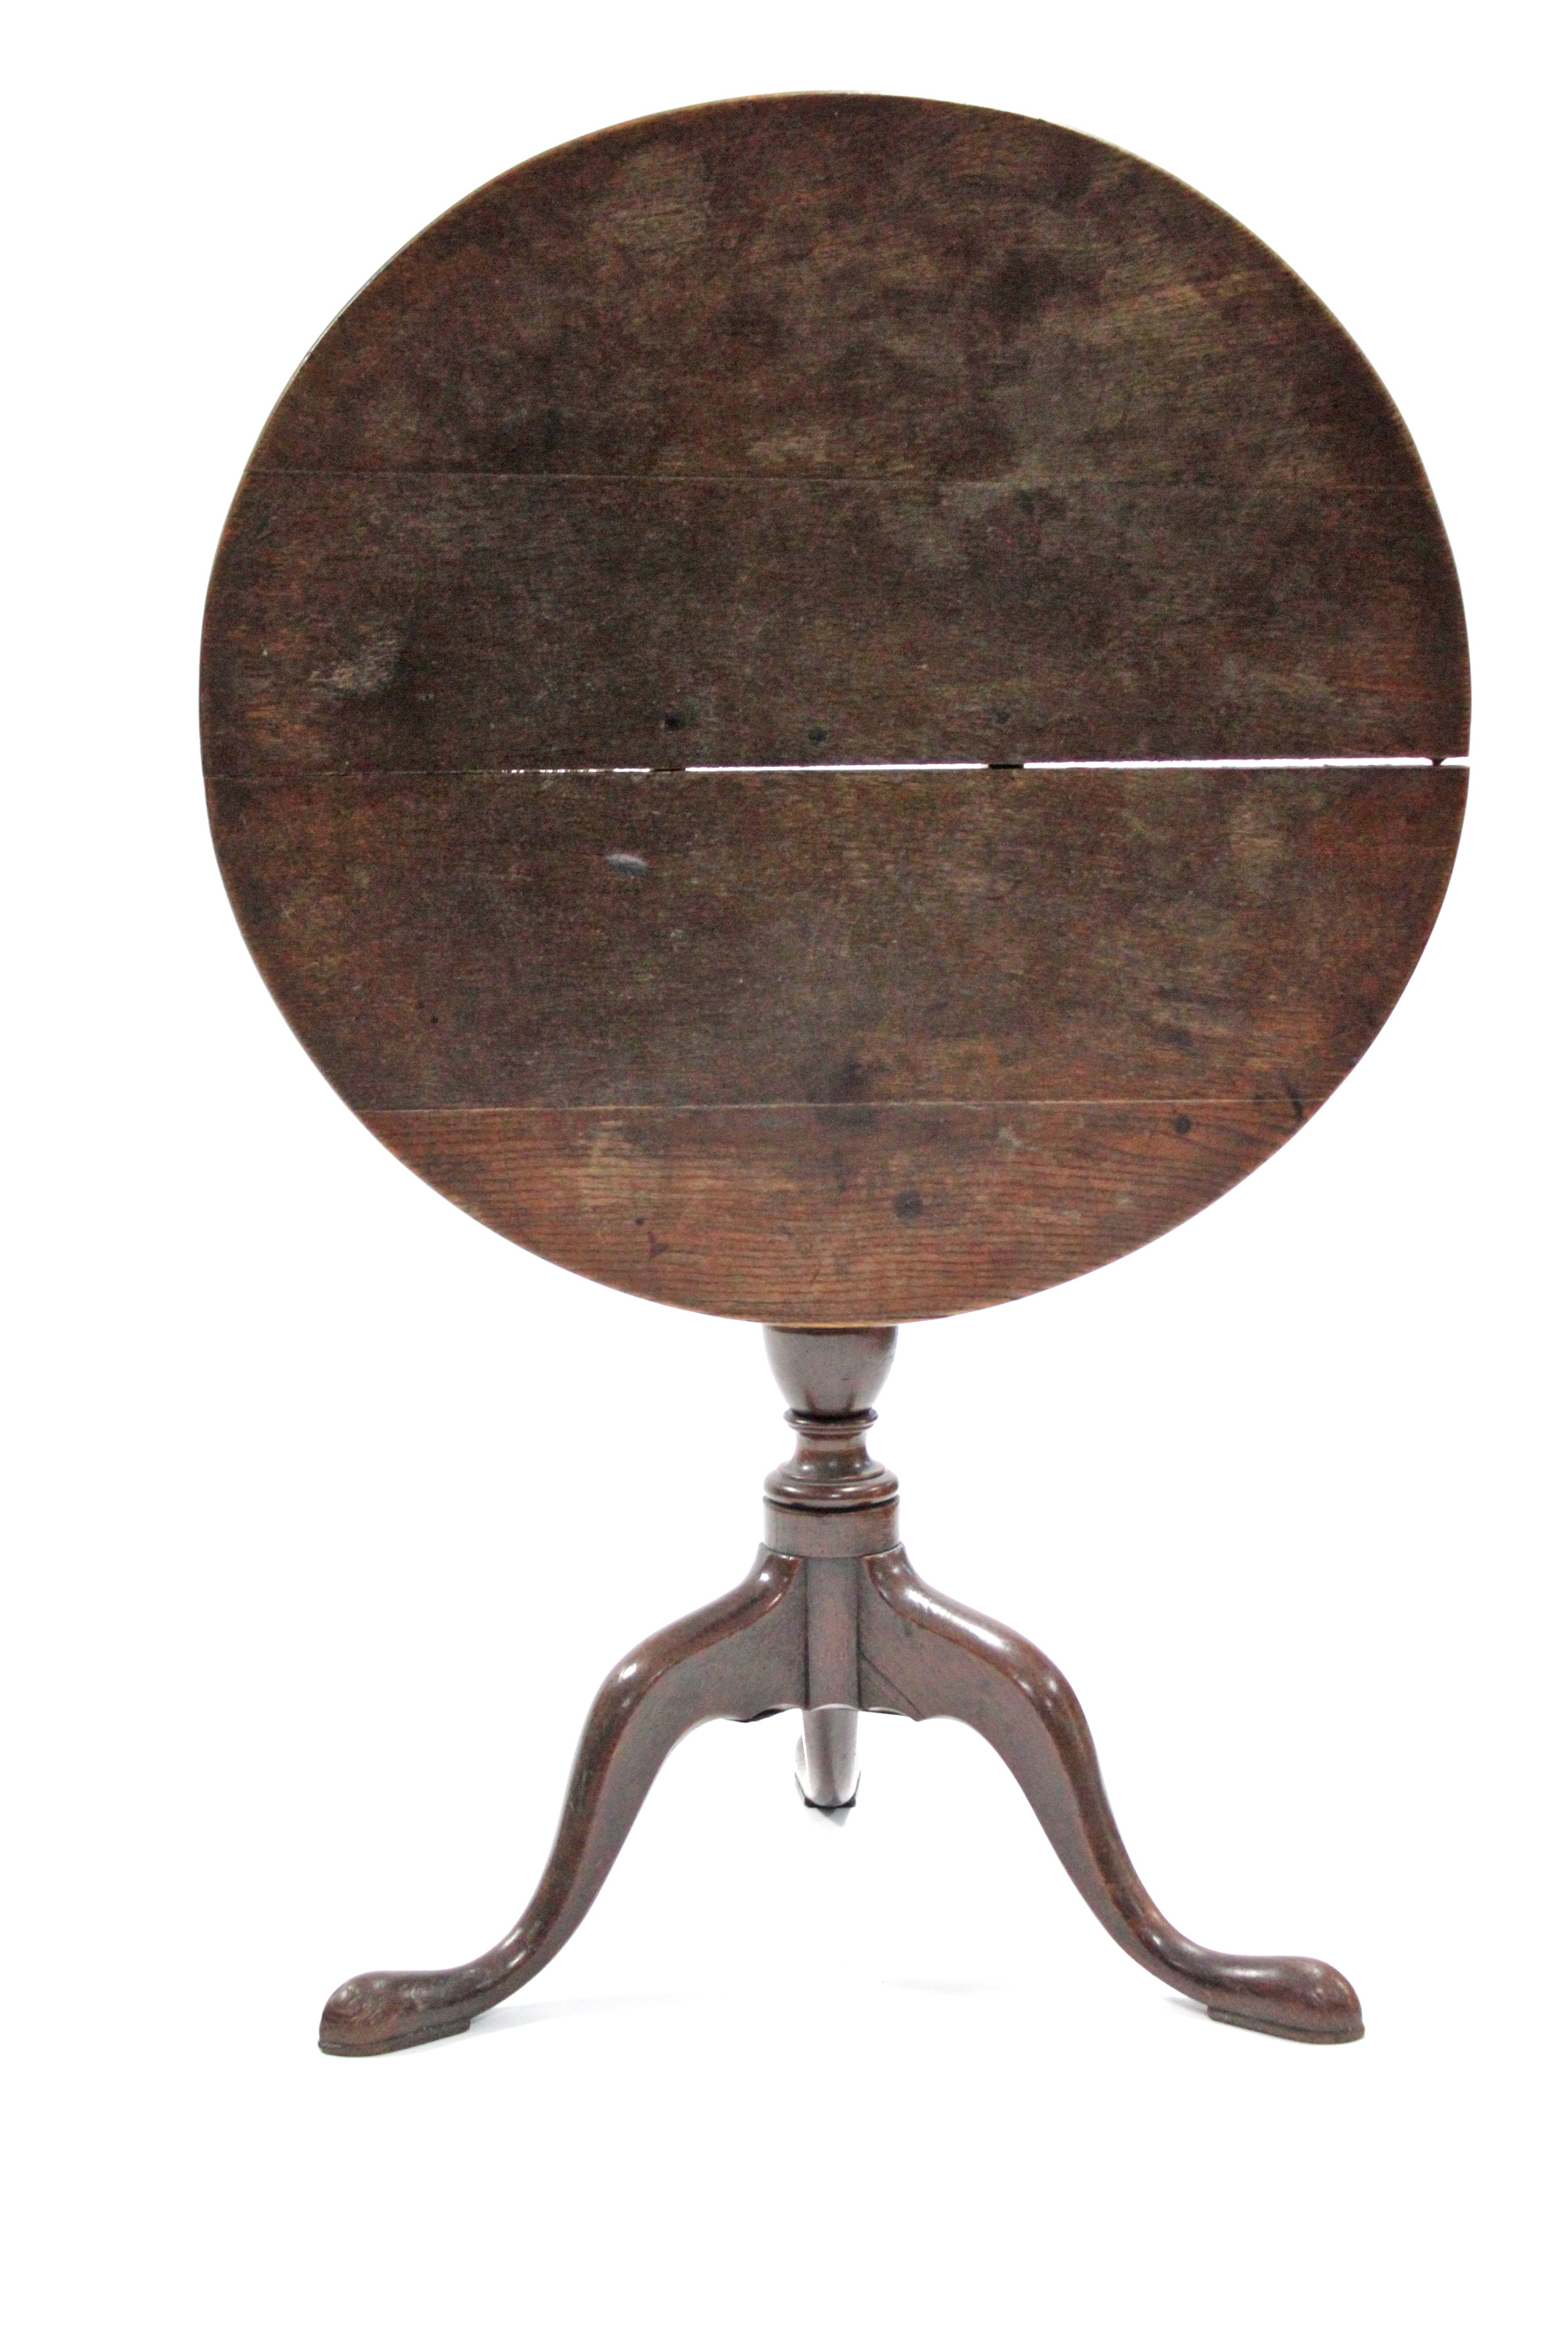 A late 18th century oak tripod table, with circular tilt-top on vase-turned centre column & cabriole